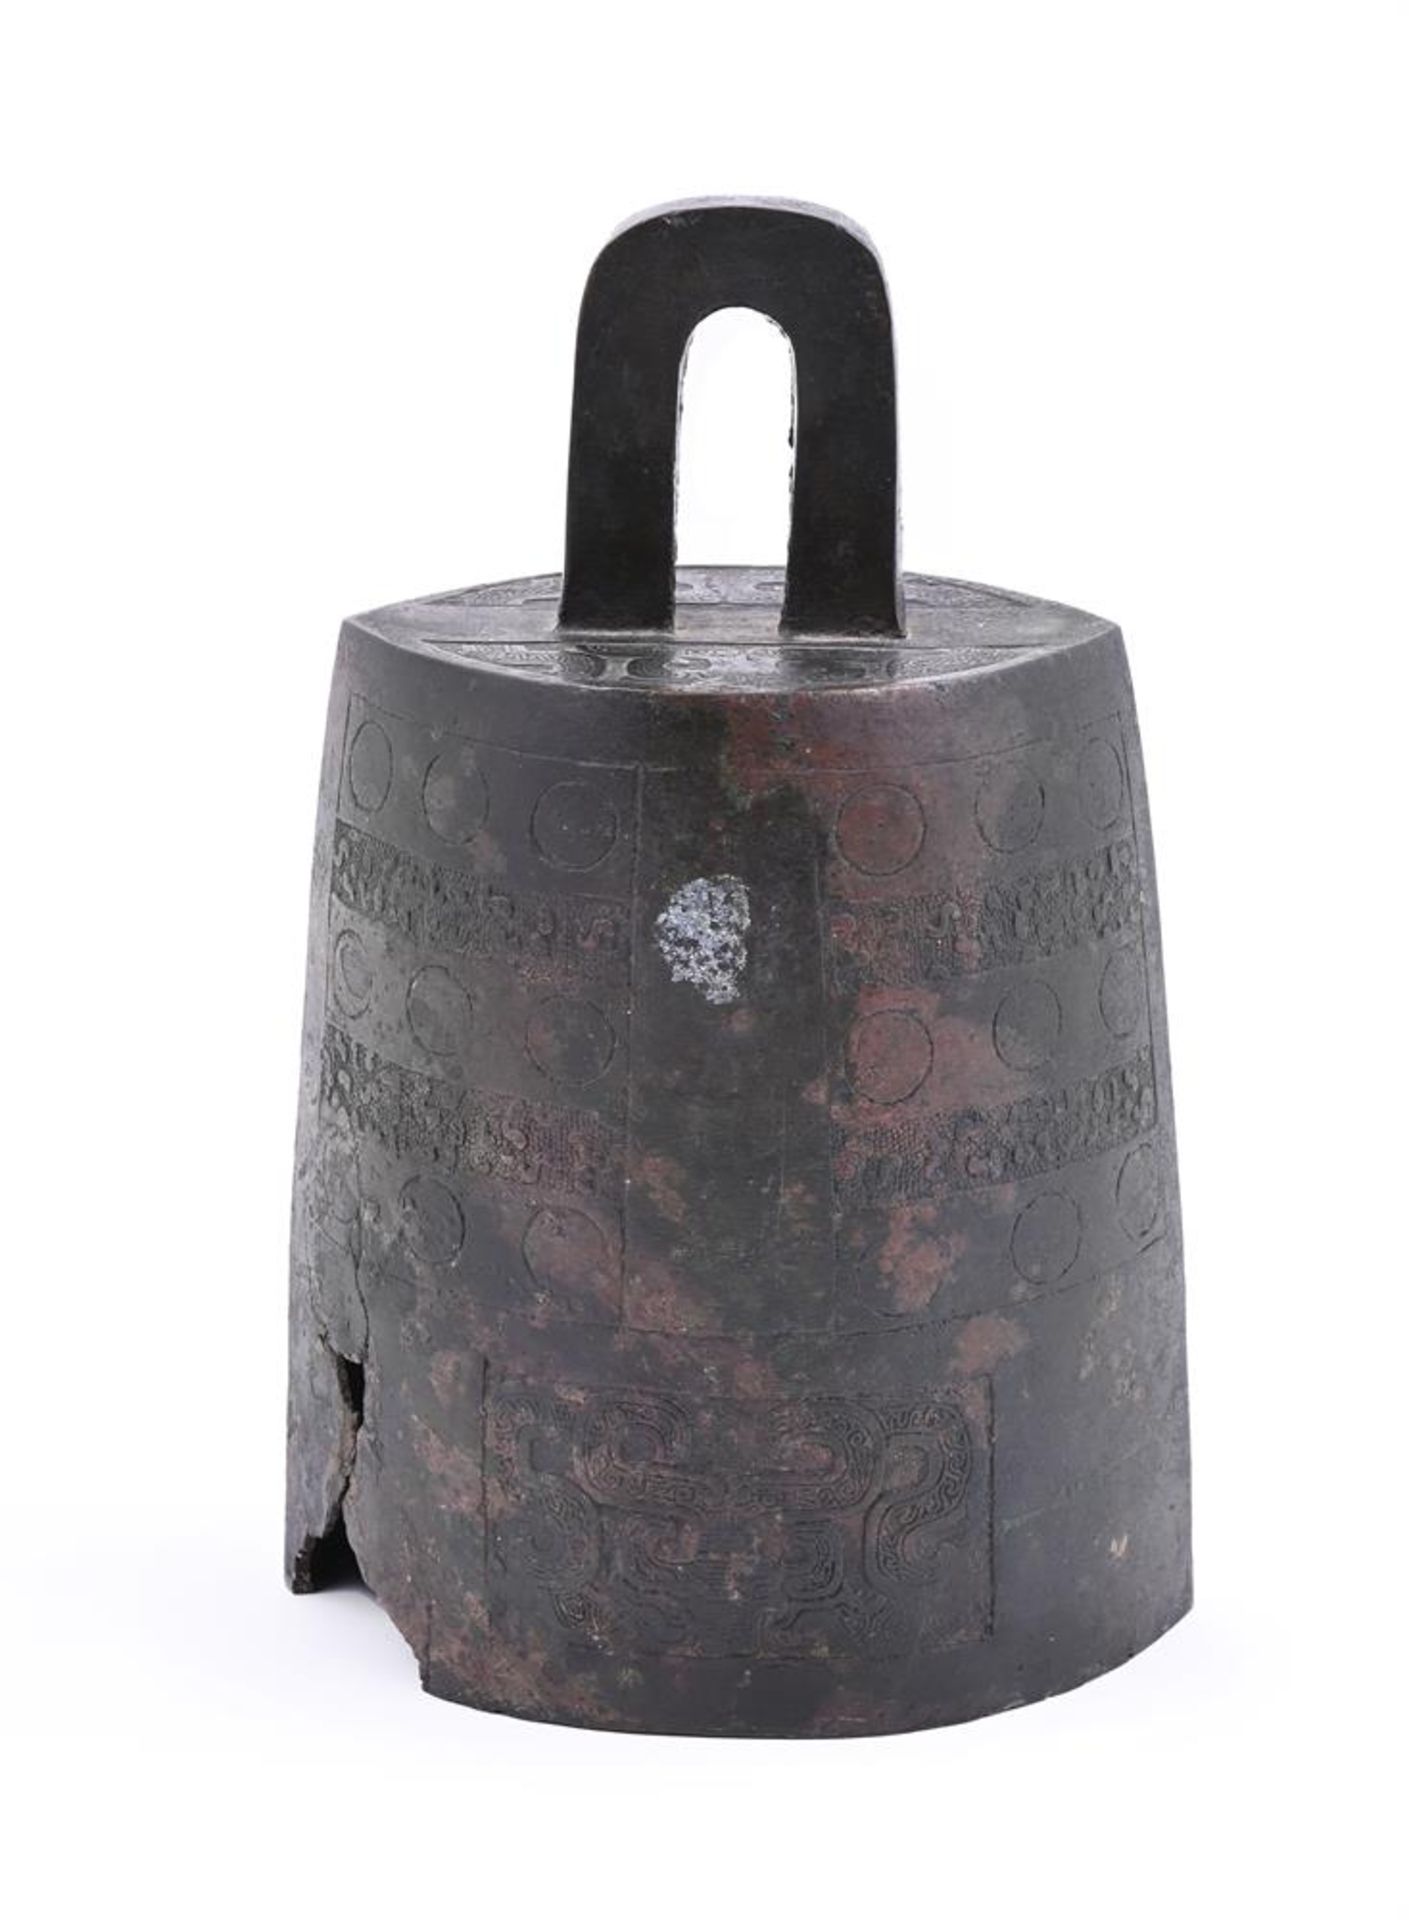 A Chinese archaistic bronze bell